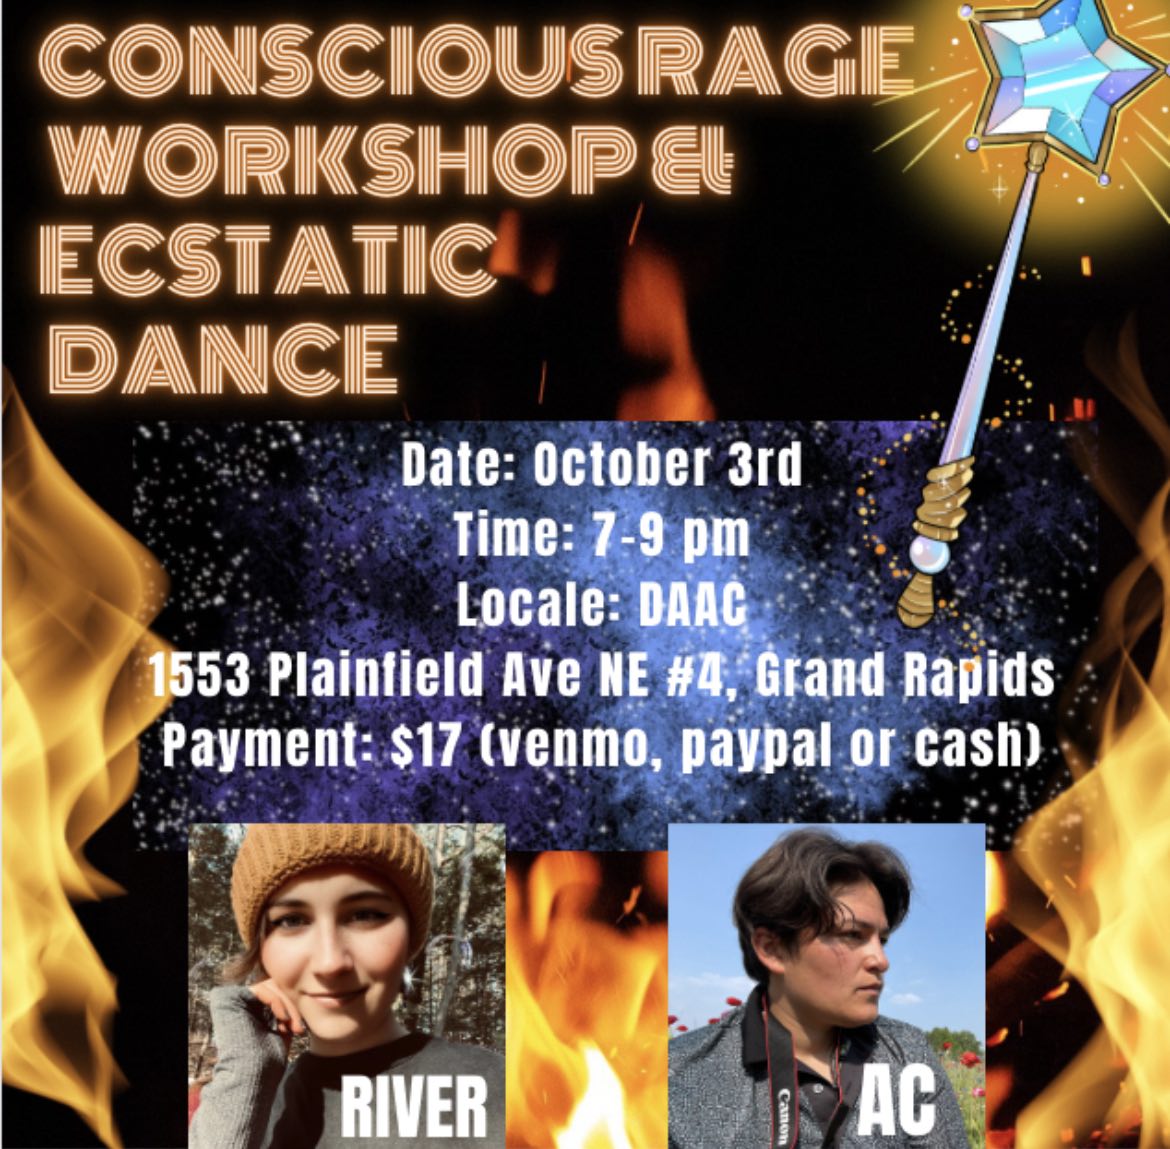 Conscious Rage Workshop and Ecstatic Dance